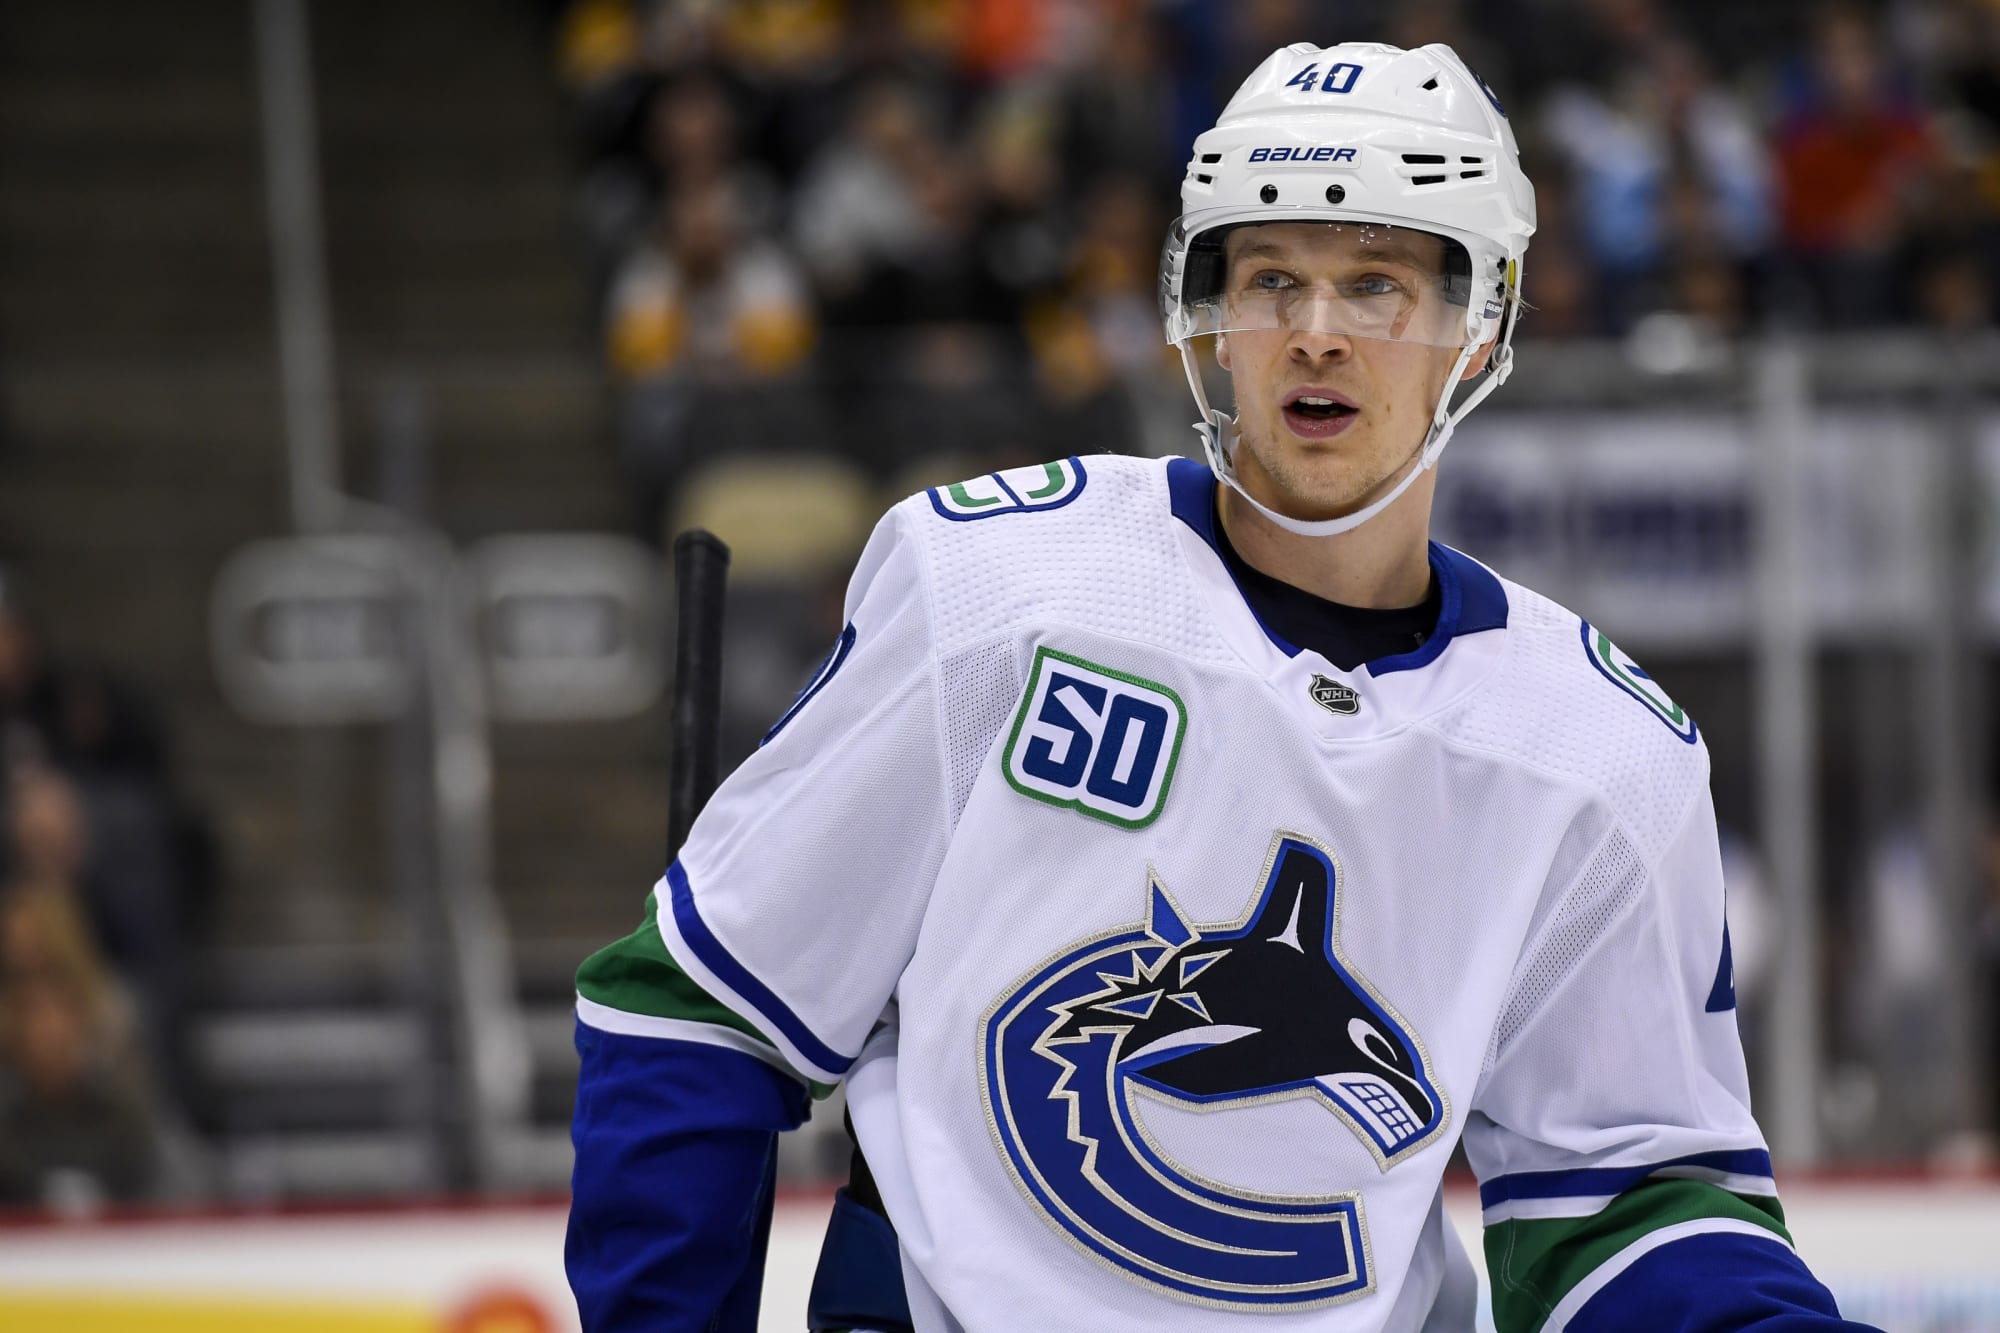 Canucks Elias Pettersson ranked 16th best centre by NHL Network